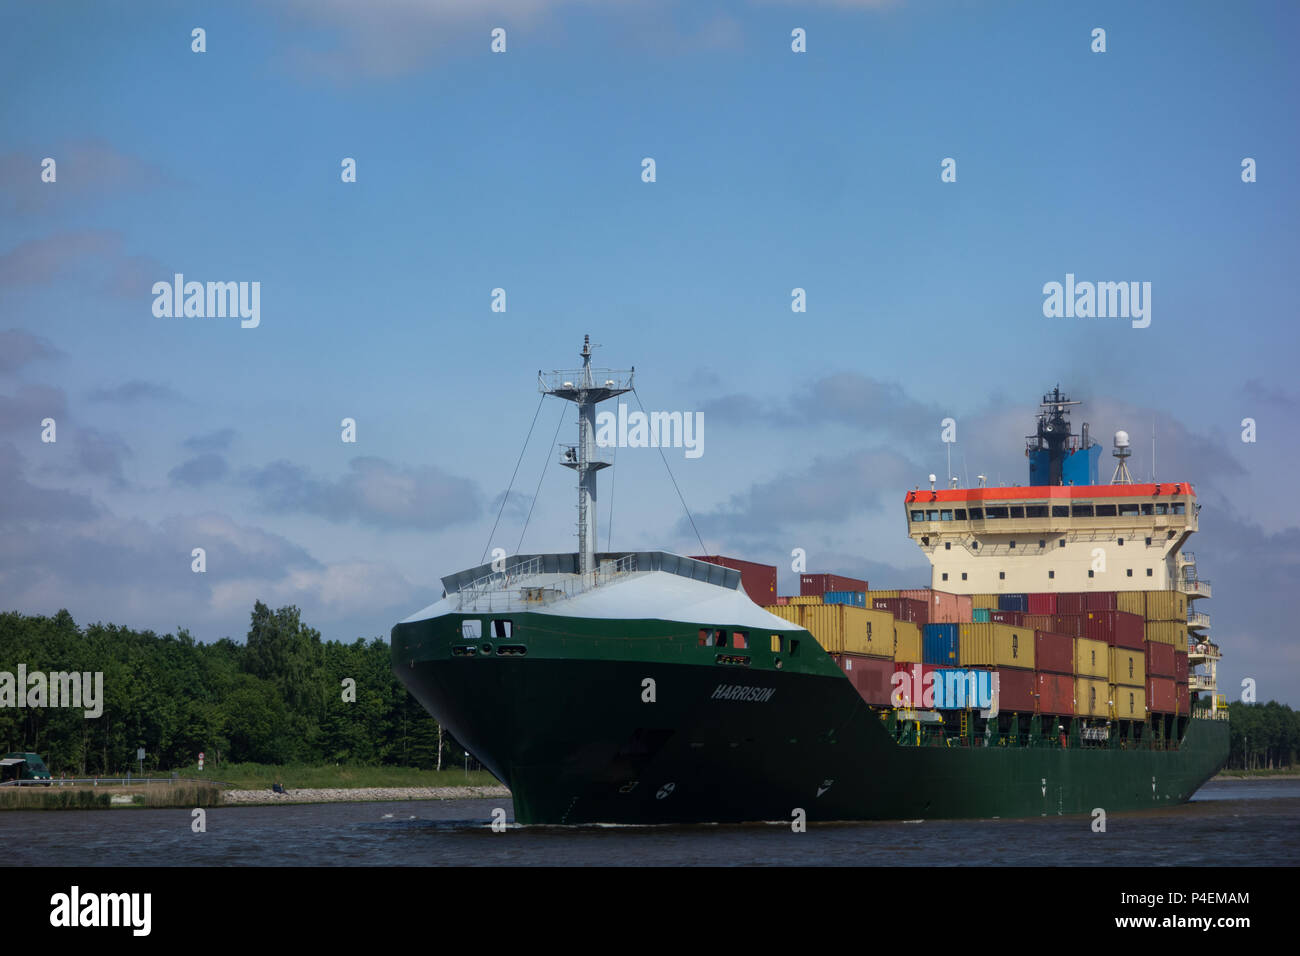 A large container ship in transit through the Kiel Canal, Germany Stock Photo